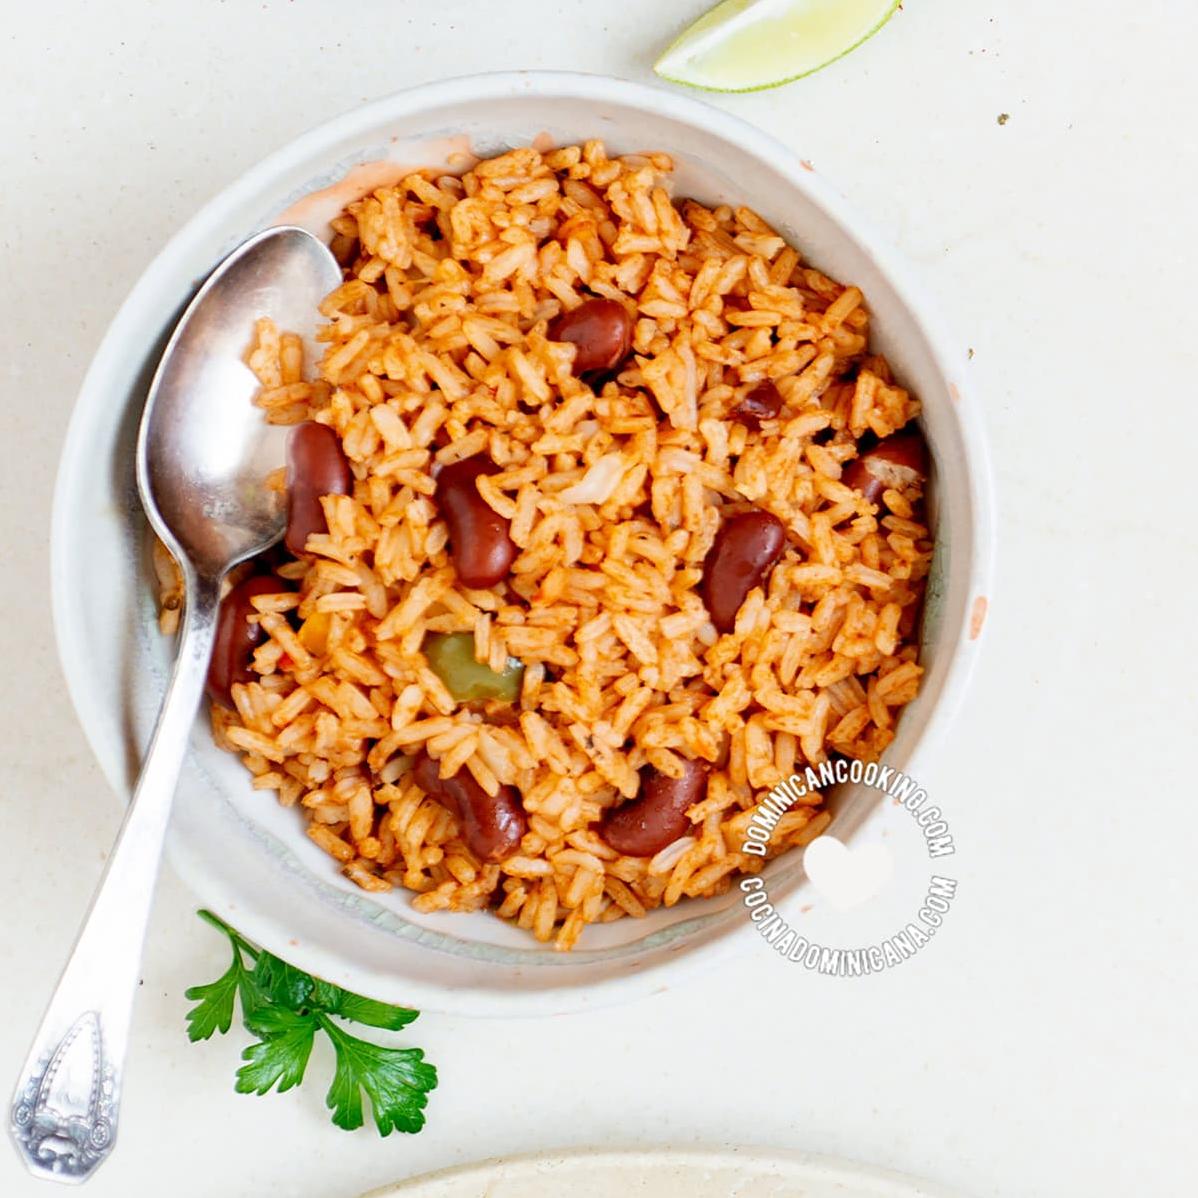  Impress your dinner guests with this aromatic and savory rice and seafood dish.